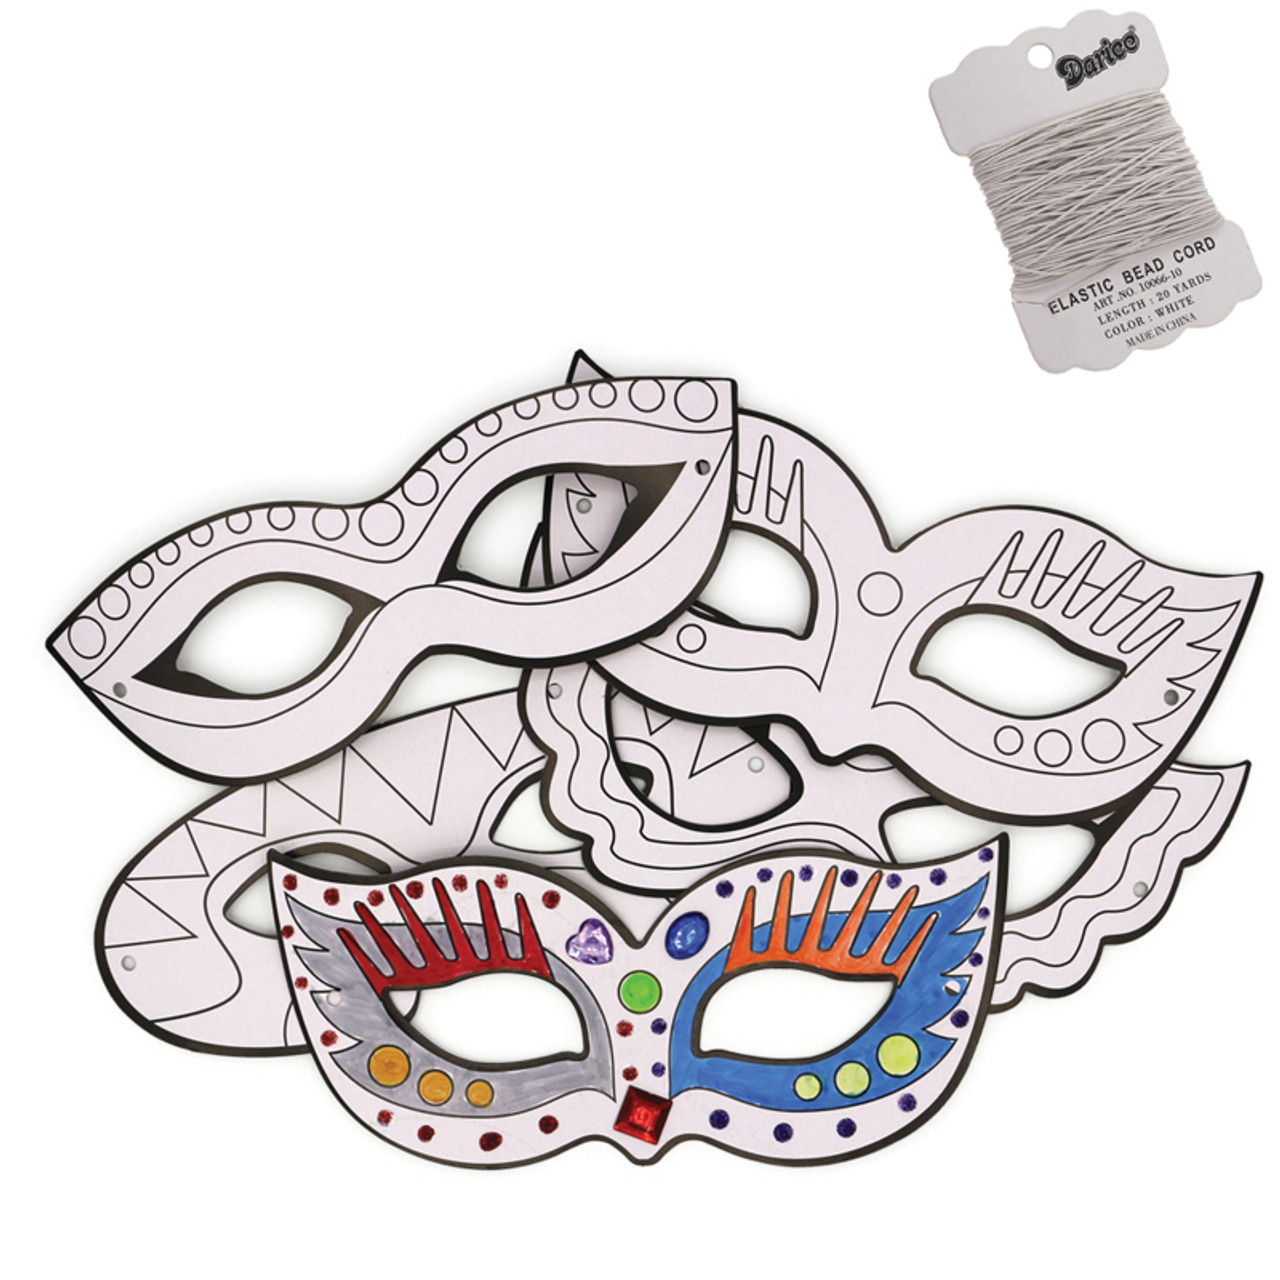 Make-Your-Own Animal Masks  Buy at the Jewish School Supply Company